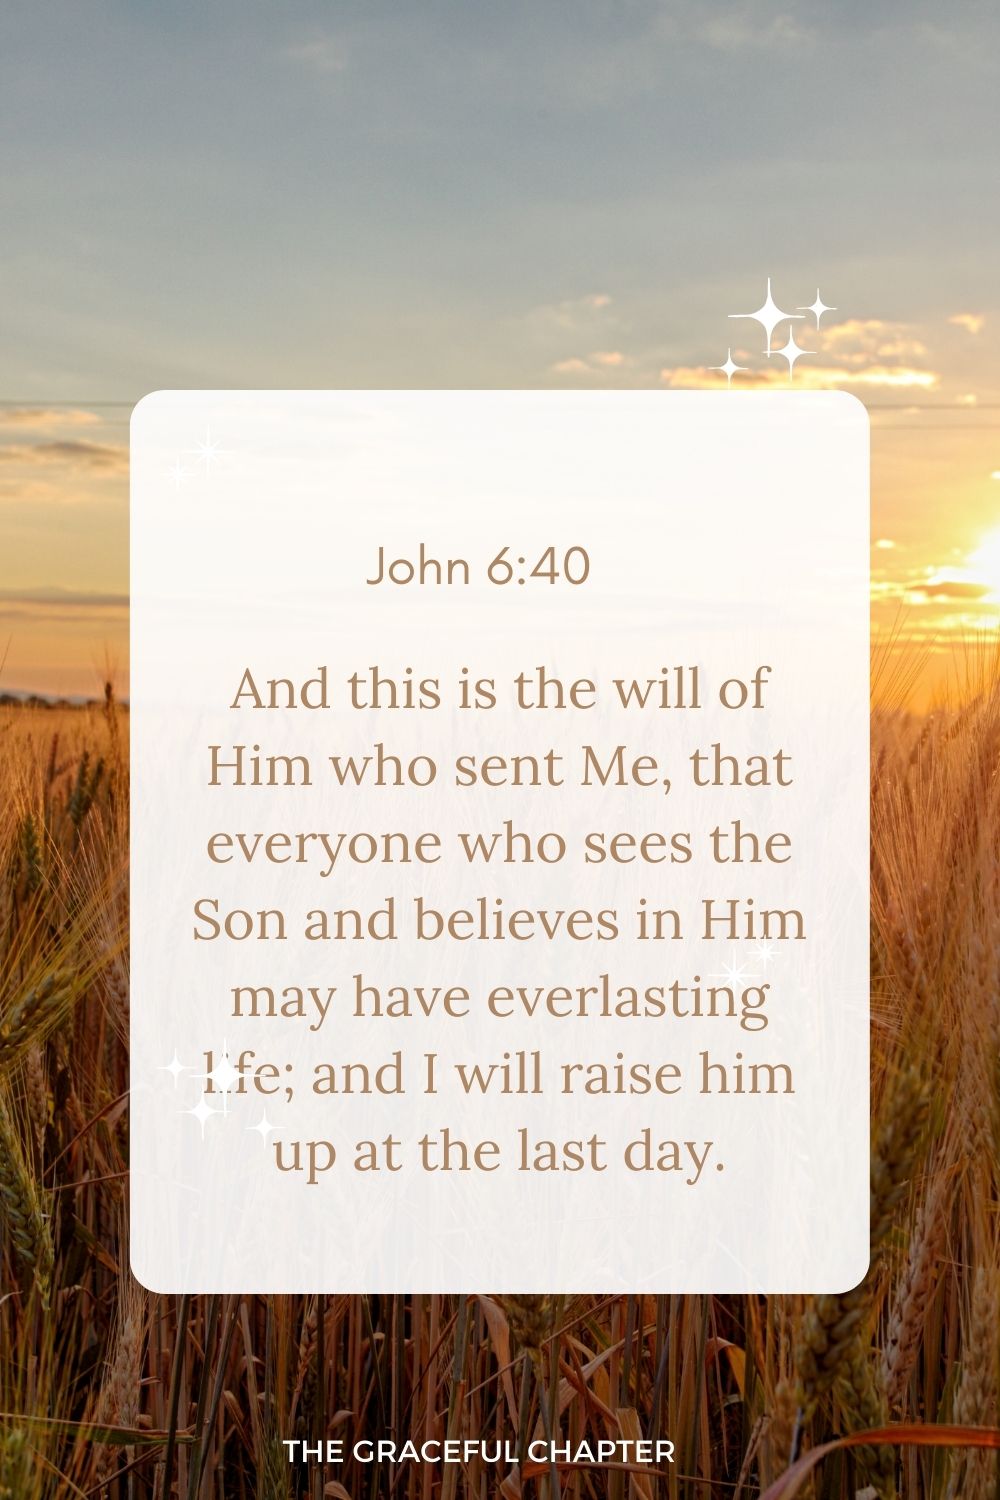 And this is the will of Him who sent Me, that everyone who sees the Son and believes in Him may have everlasting life; and I will raise him up at the last day. John 6:40